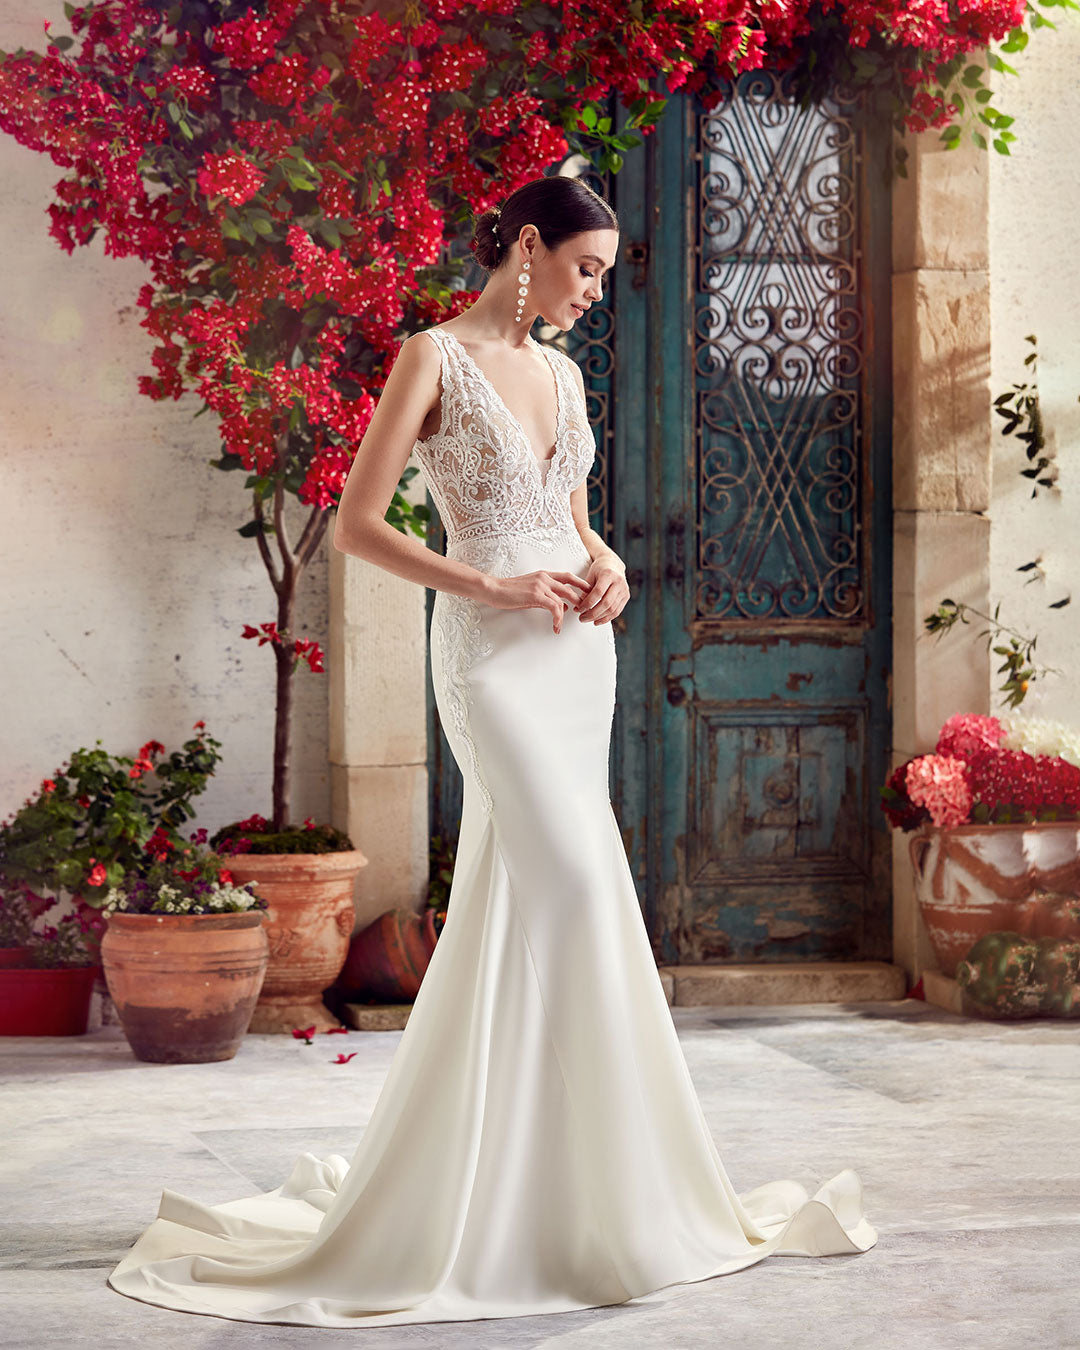 Simple wedding dress with sheer lace bodice and train in ivory.